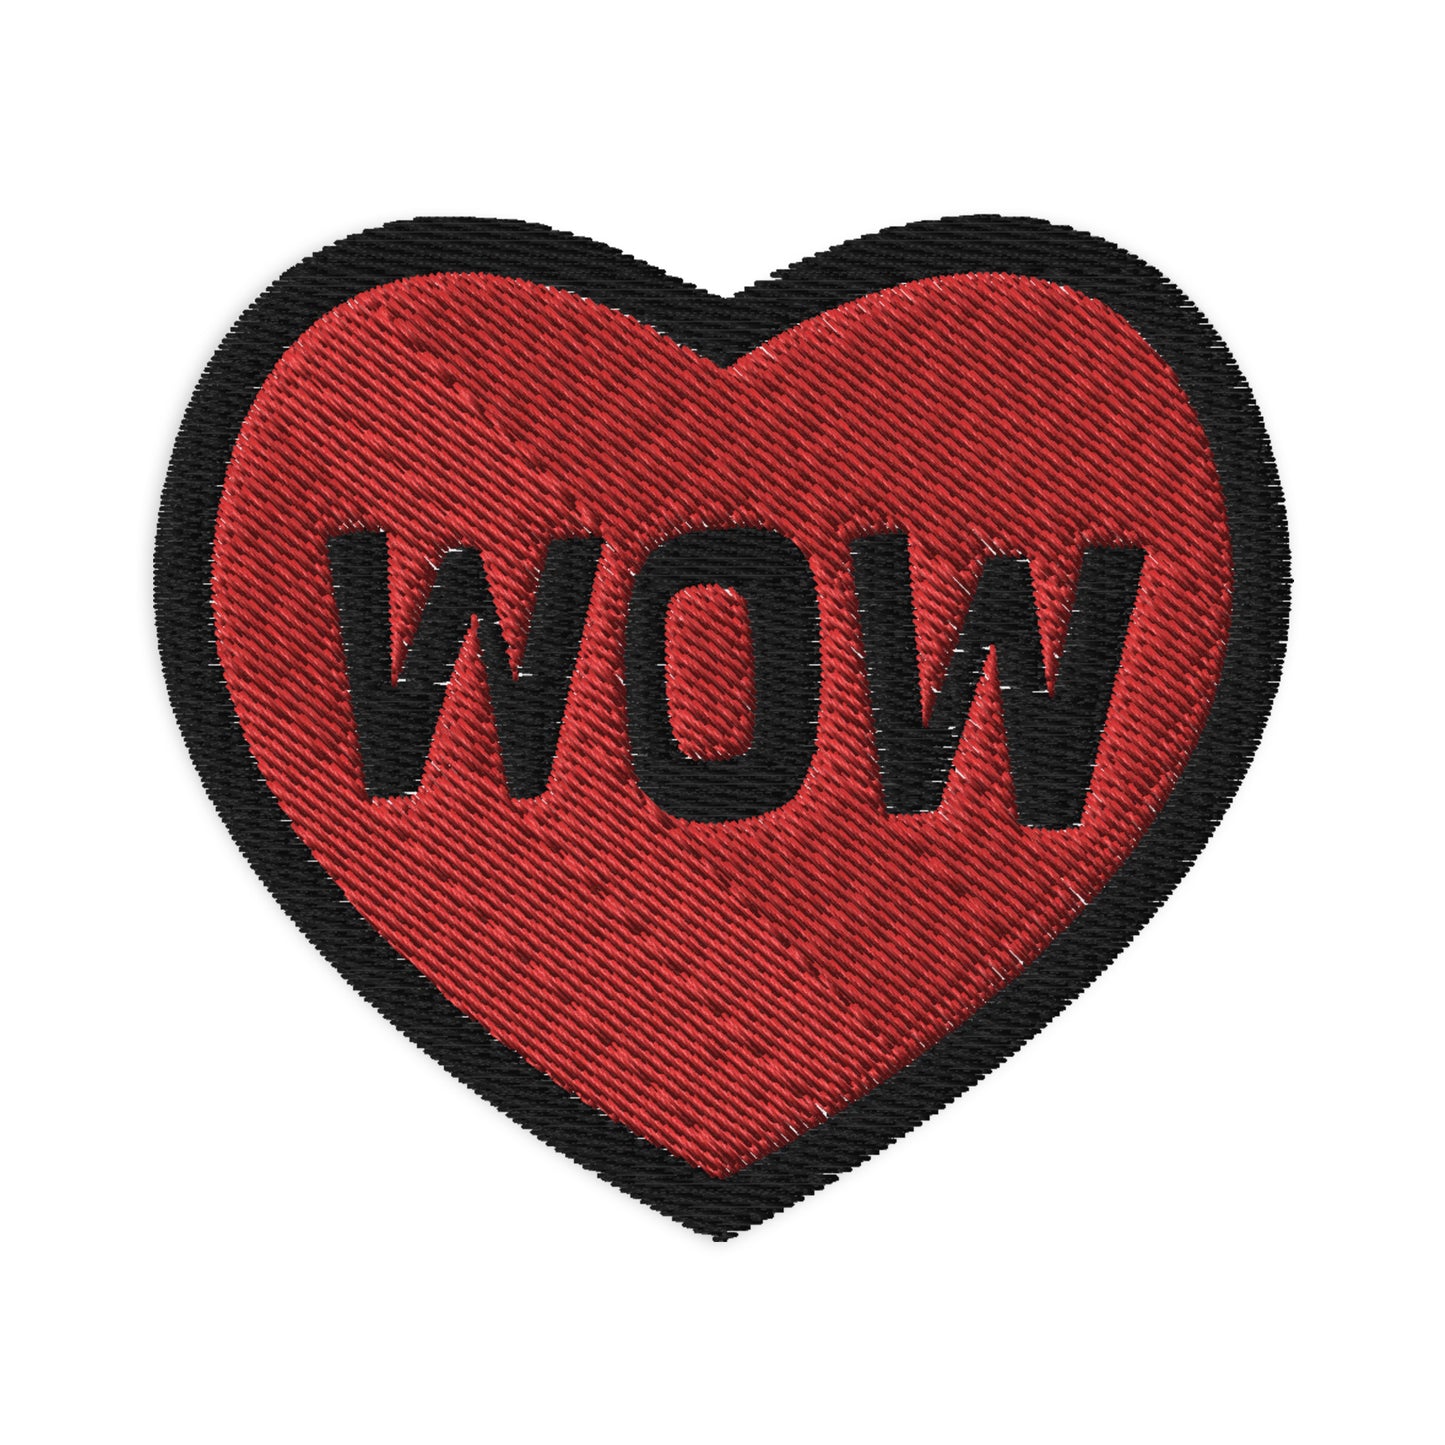 WOW Tattoo Heart patch